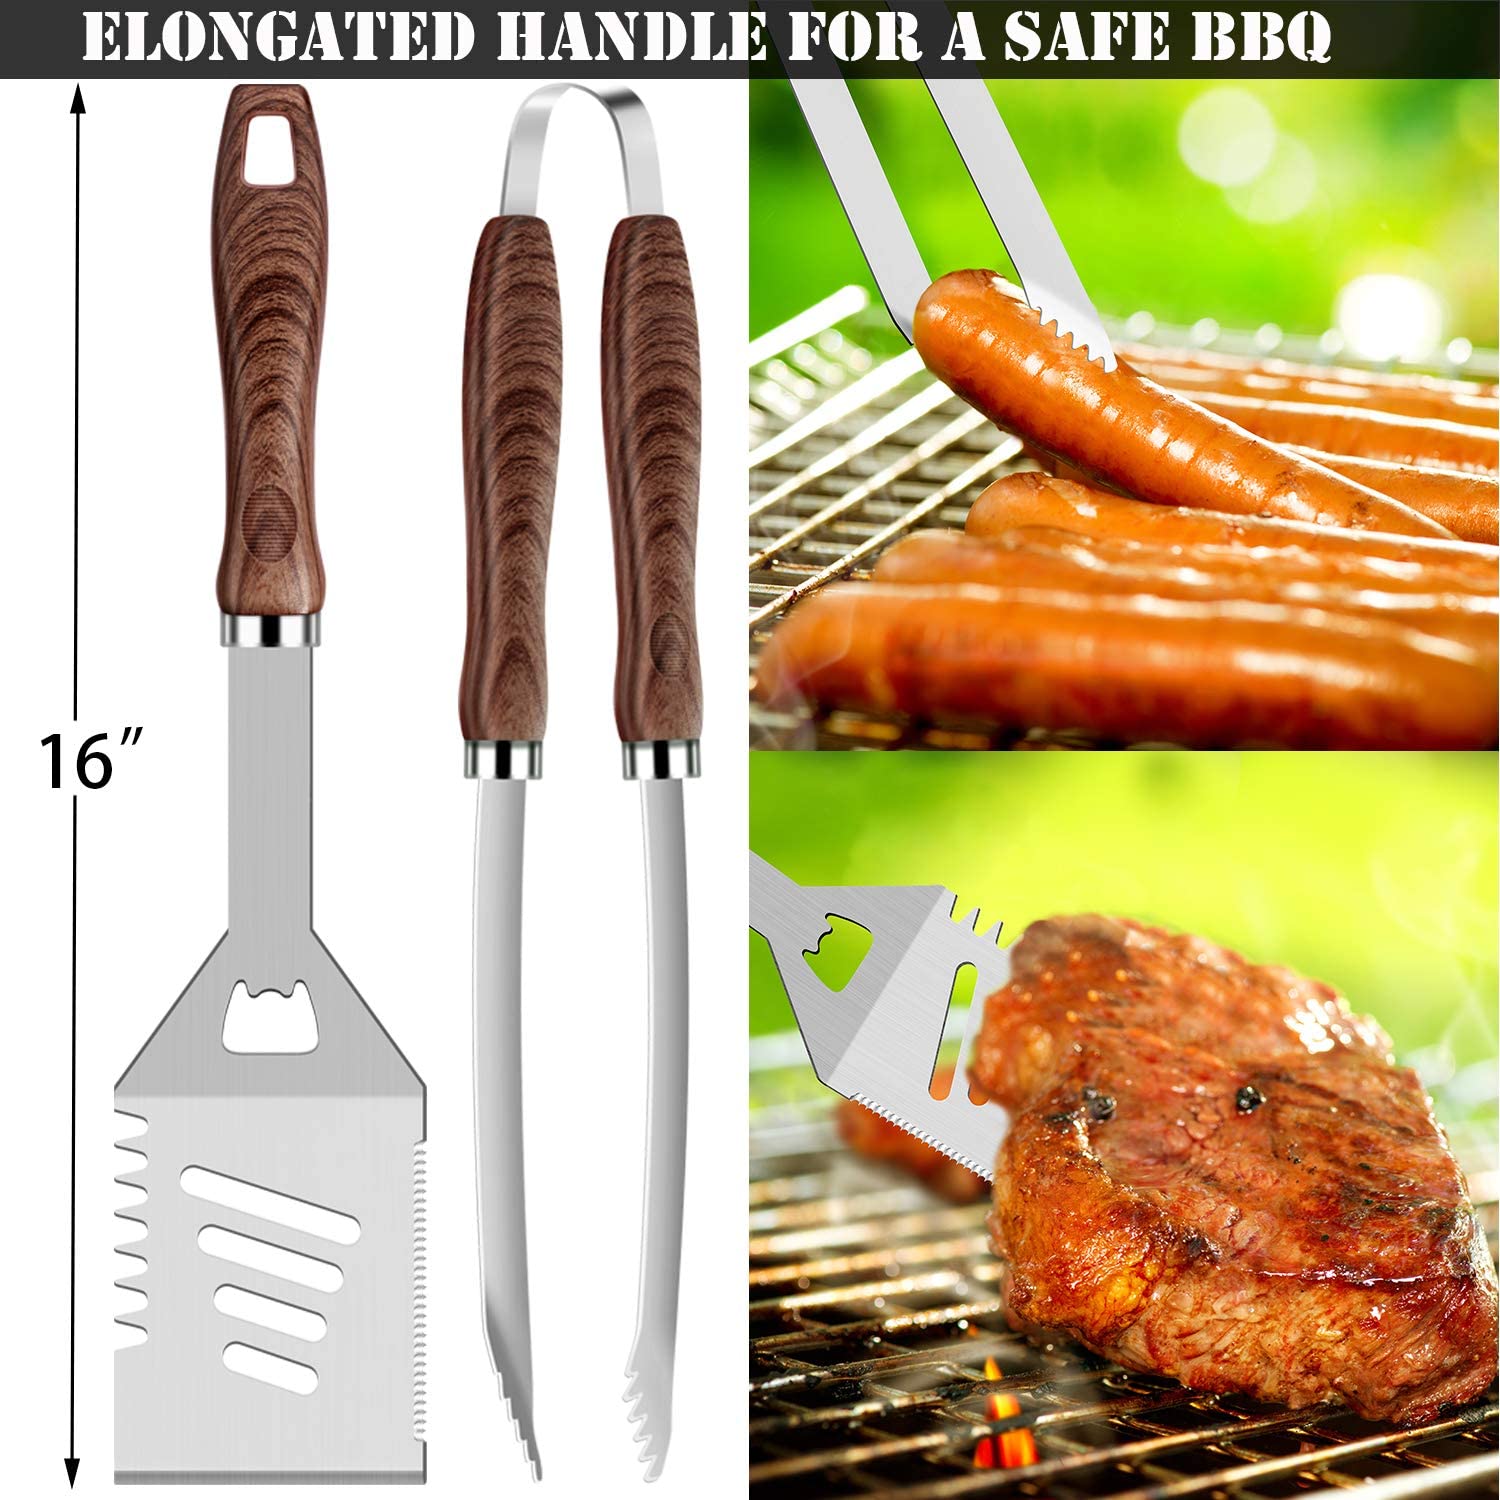 romanticist 26pcs grilling accessories kit for men women stainless steel heavy duty bbq tools with glove and corkscrew g 2